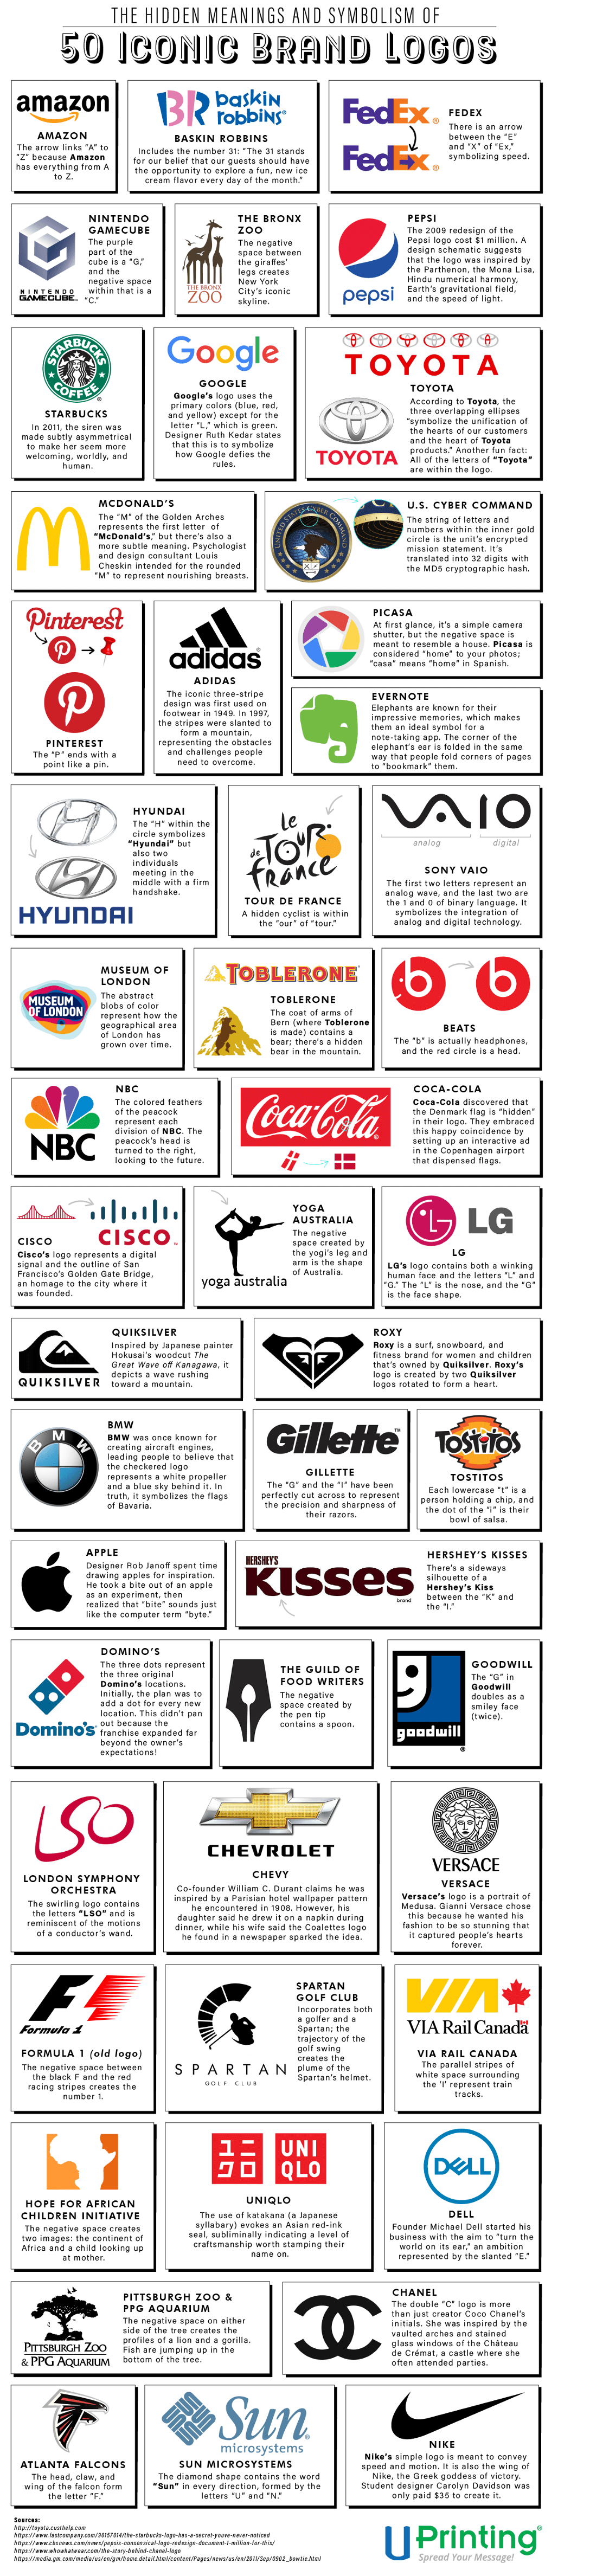 The Hidden Meanings of 50 Iconic Brand Logos